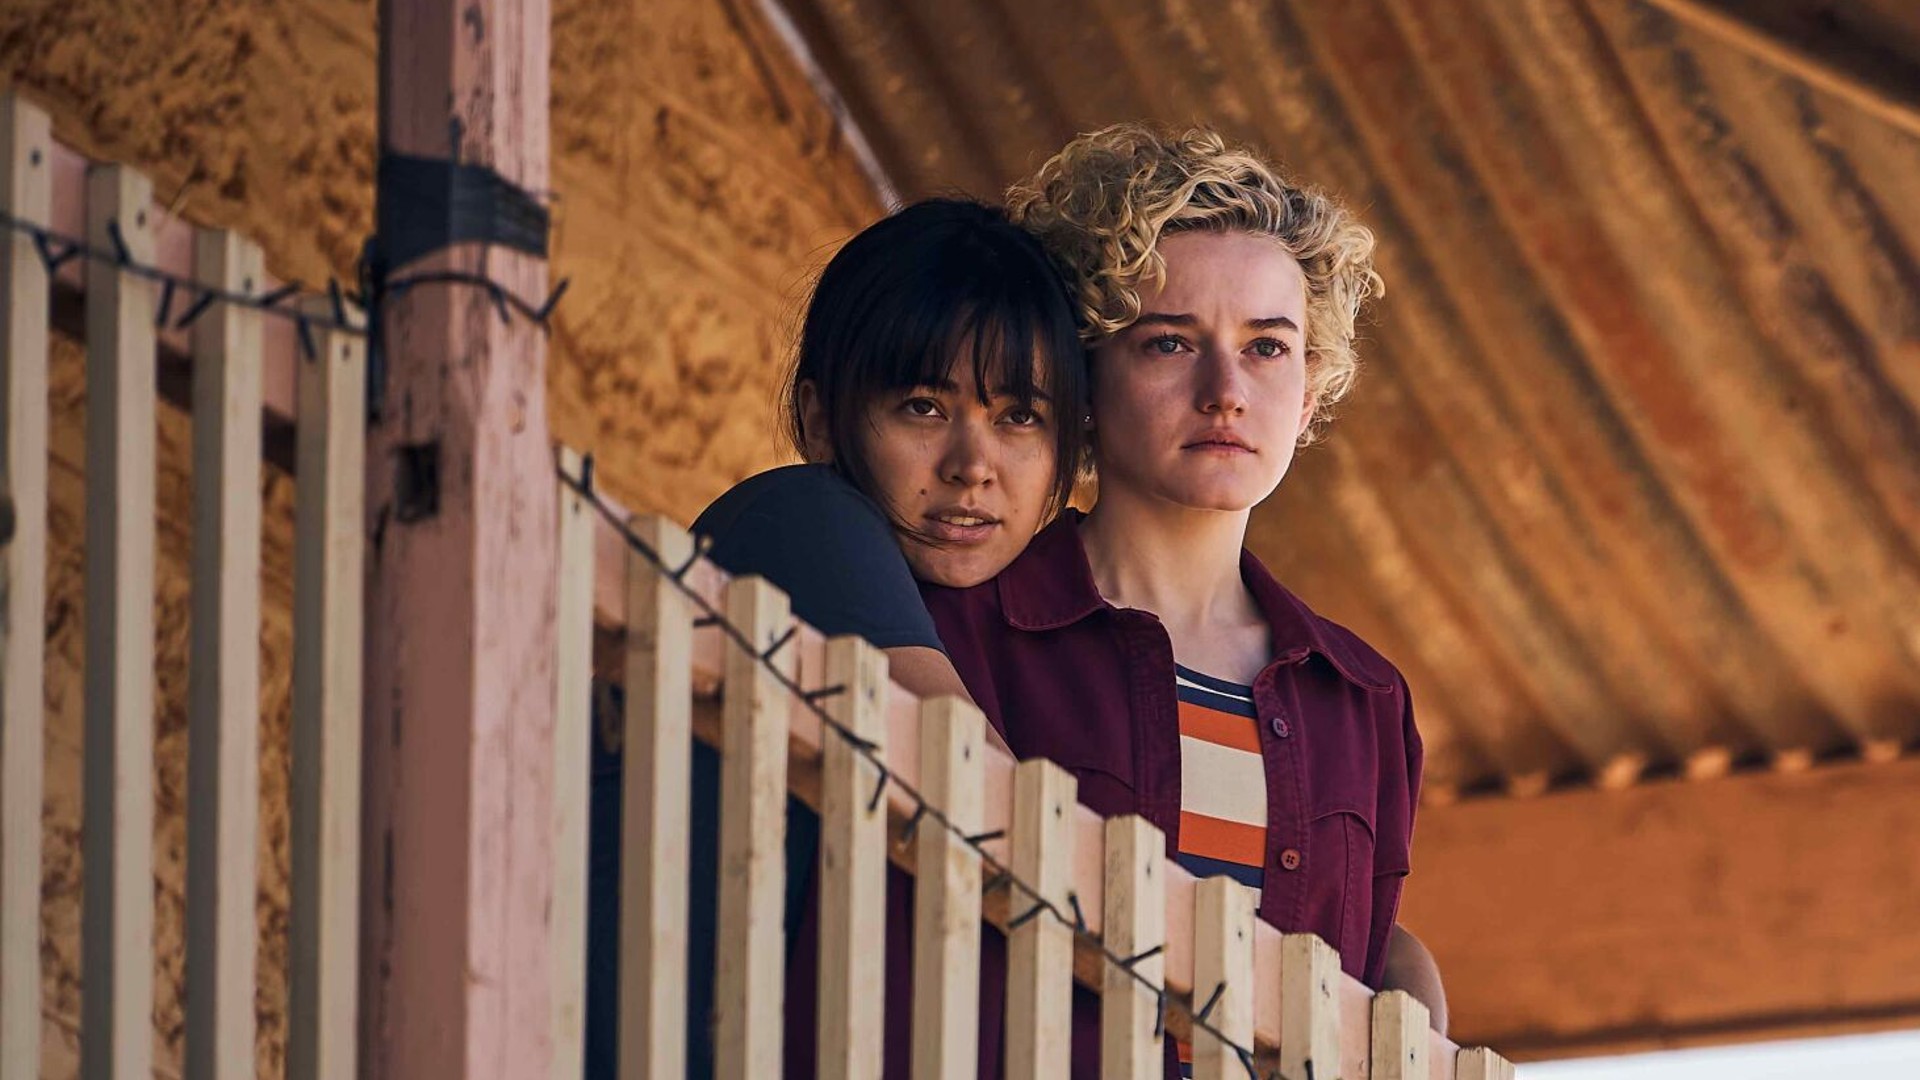 Jessica Henwick and Julia Garner hug and look out over a balcony in a still from the movie The Royal Hotel